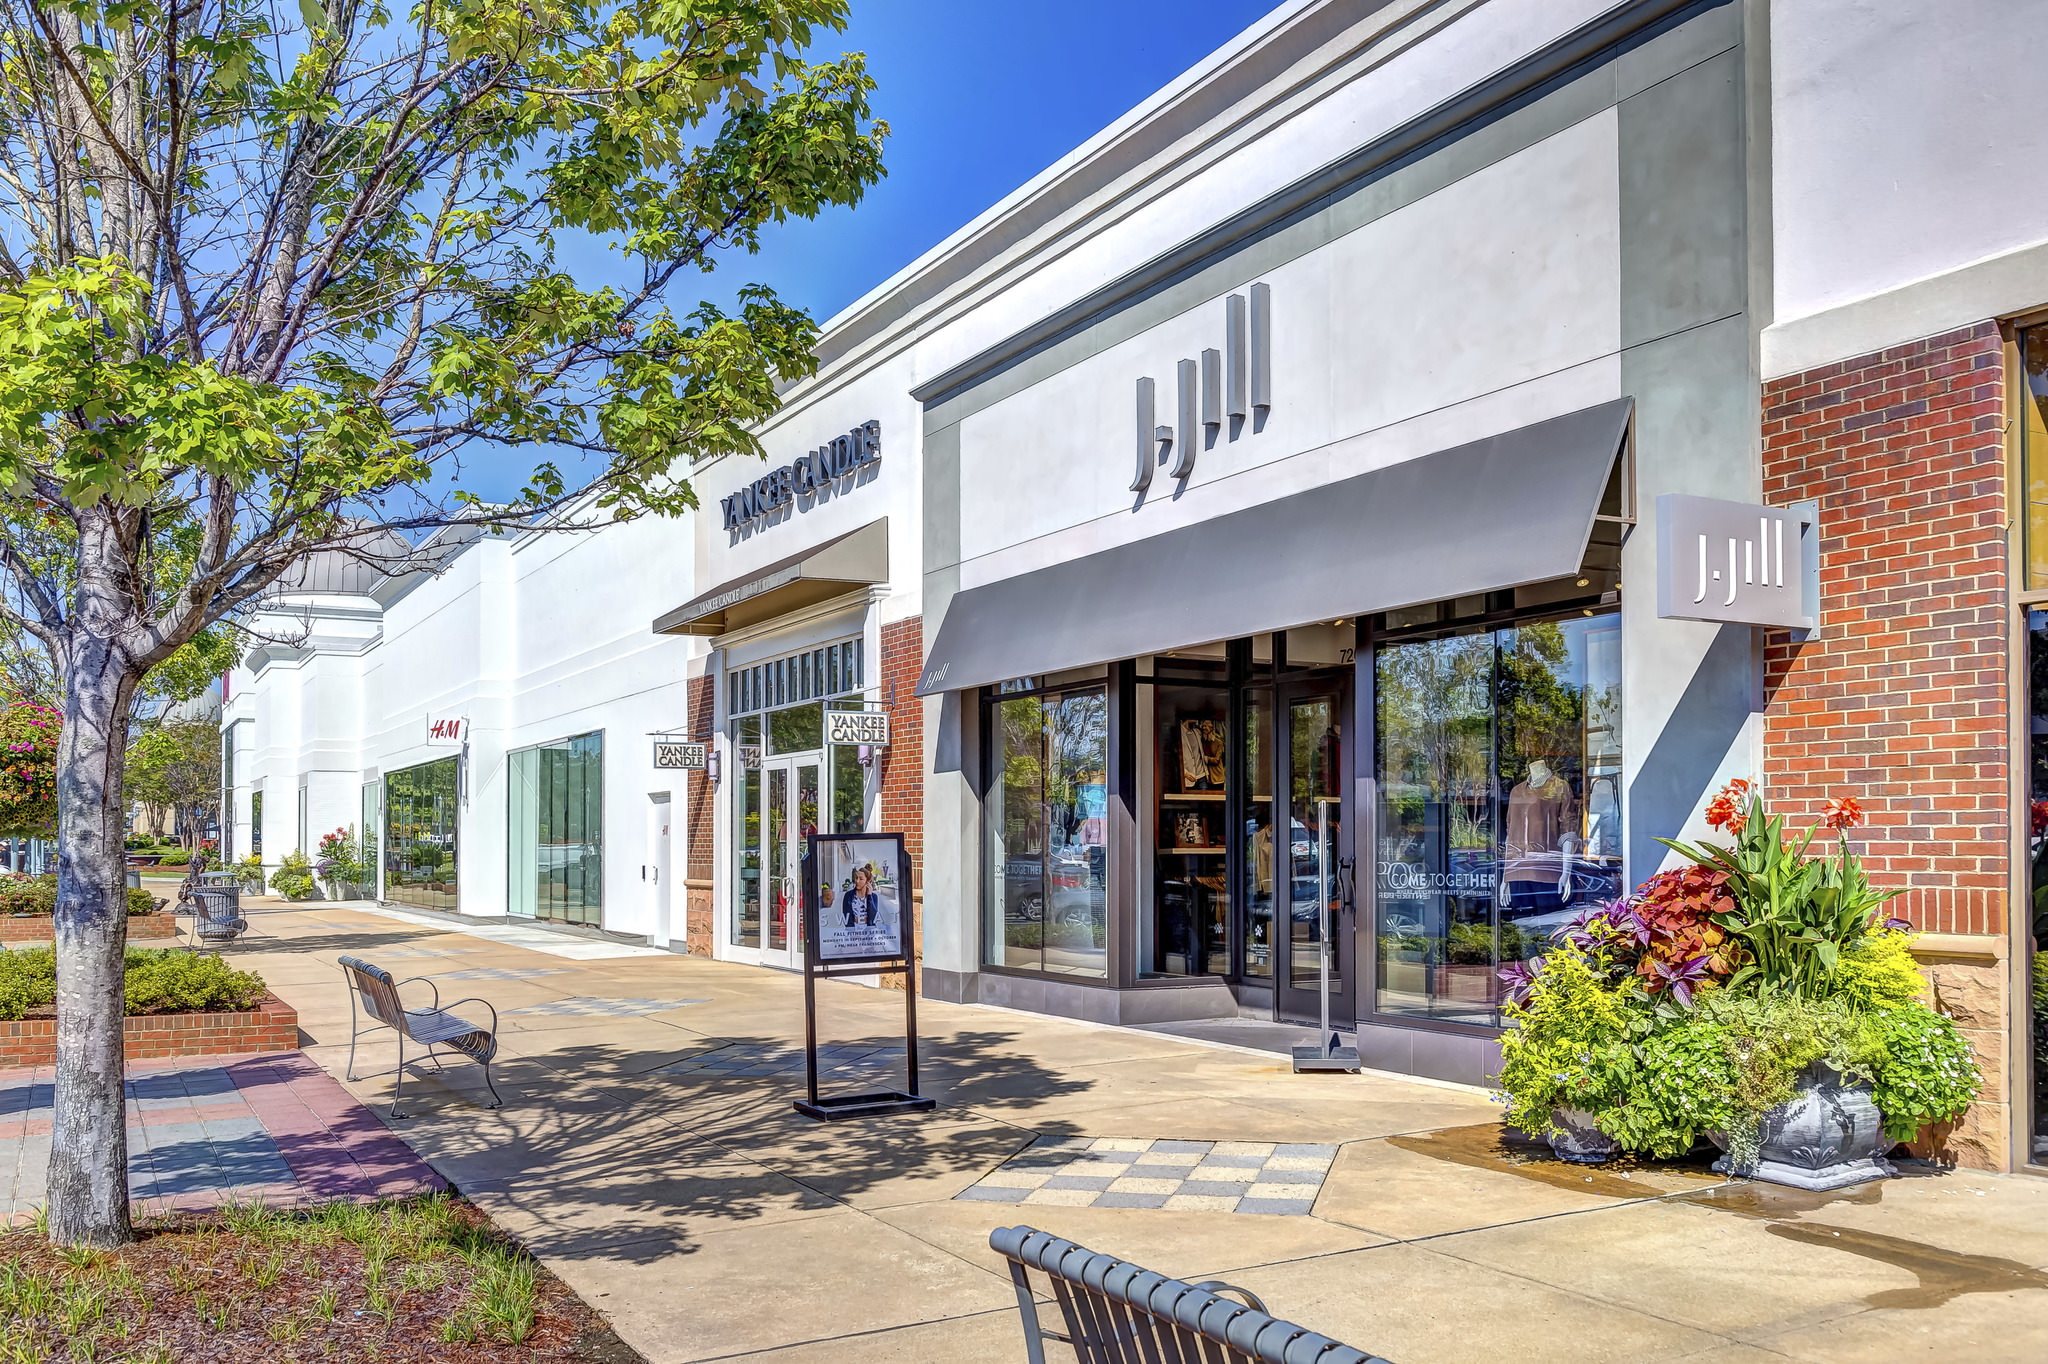 On the Go – The Shoppes at EastChase